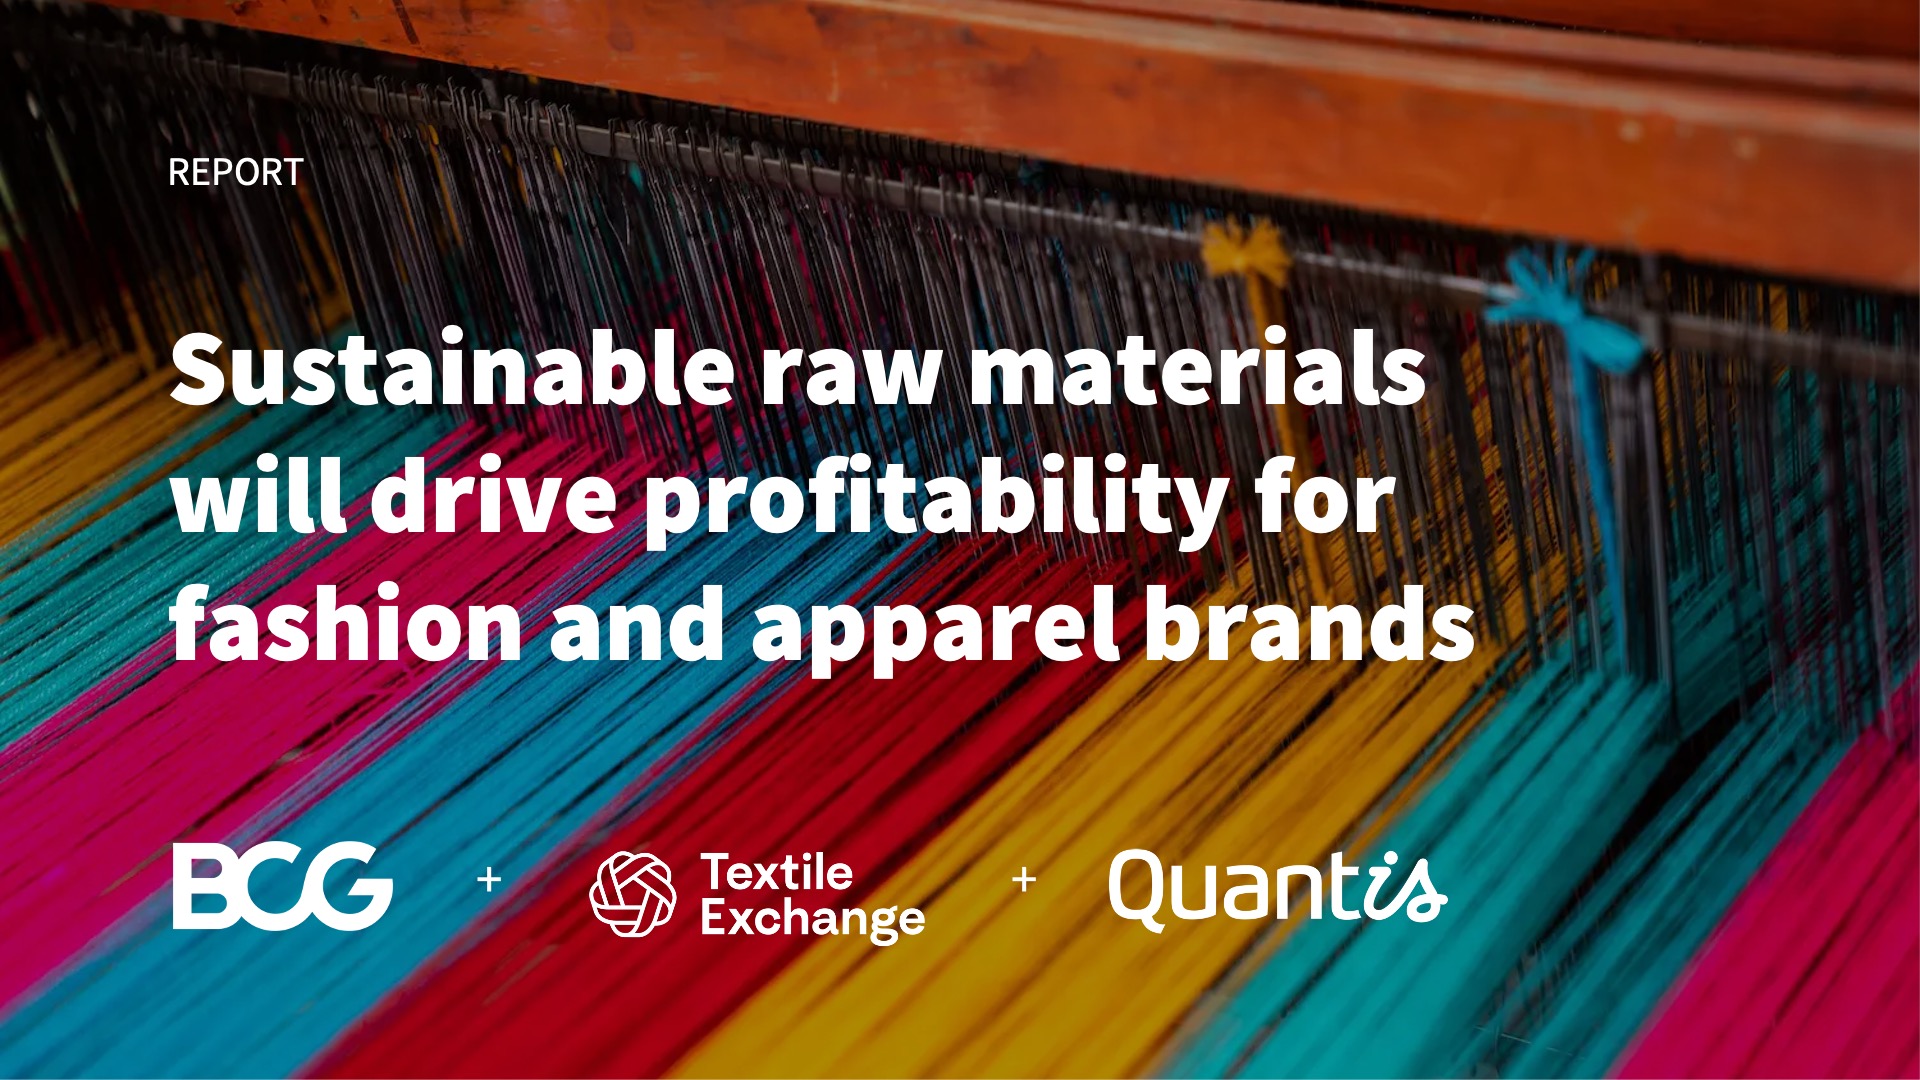 Sustainable raw materials boost fashion profits